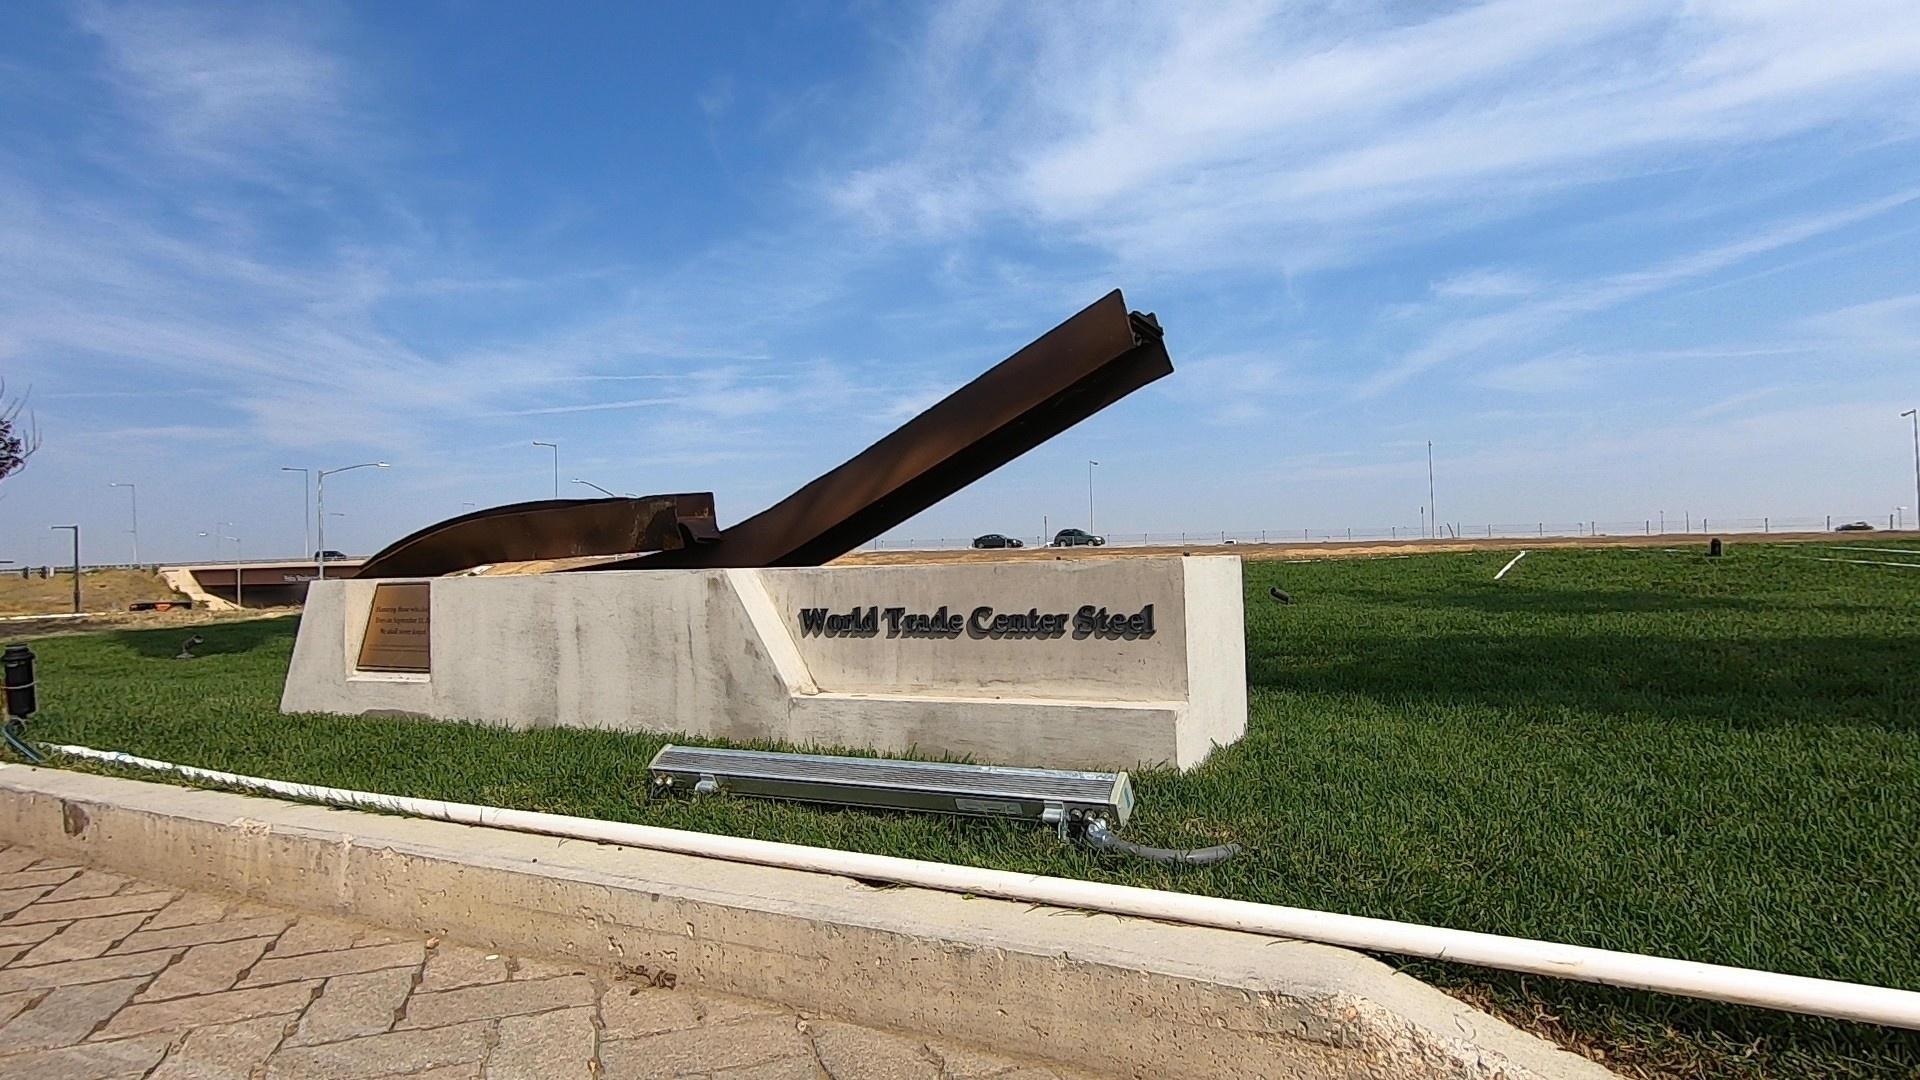 A mangled piece of steel from the World Trade Center is now part of a September 11 memorial near DIA